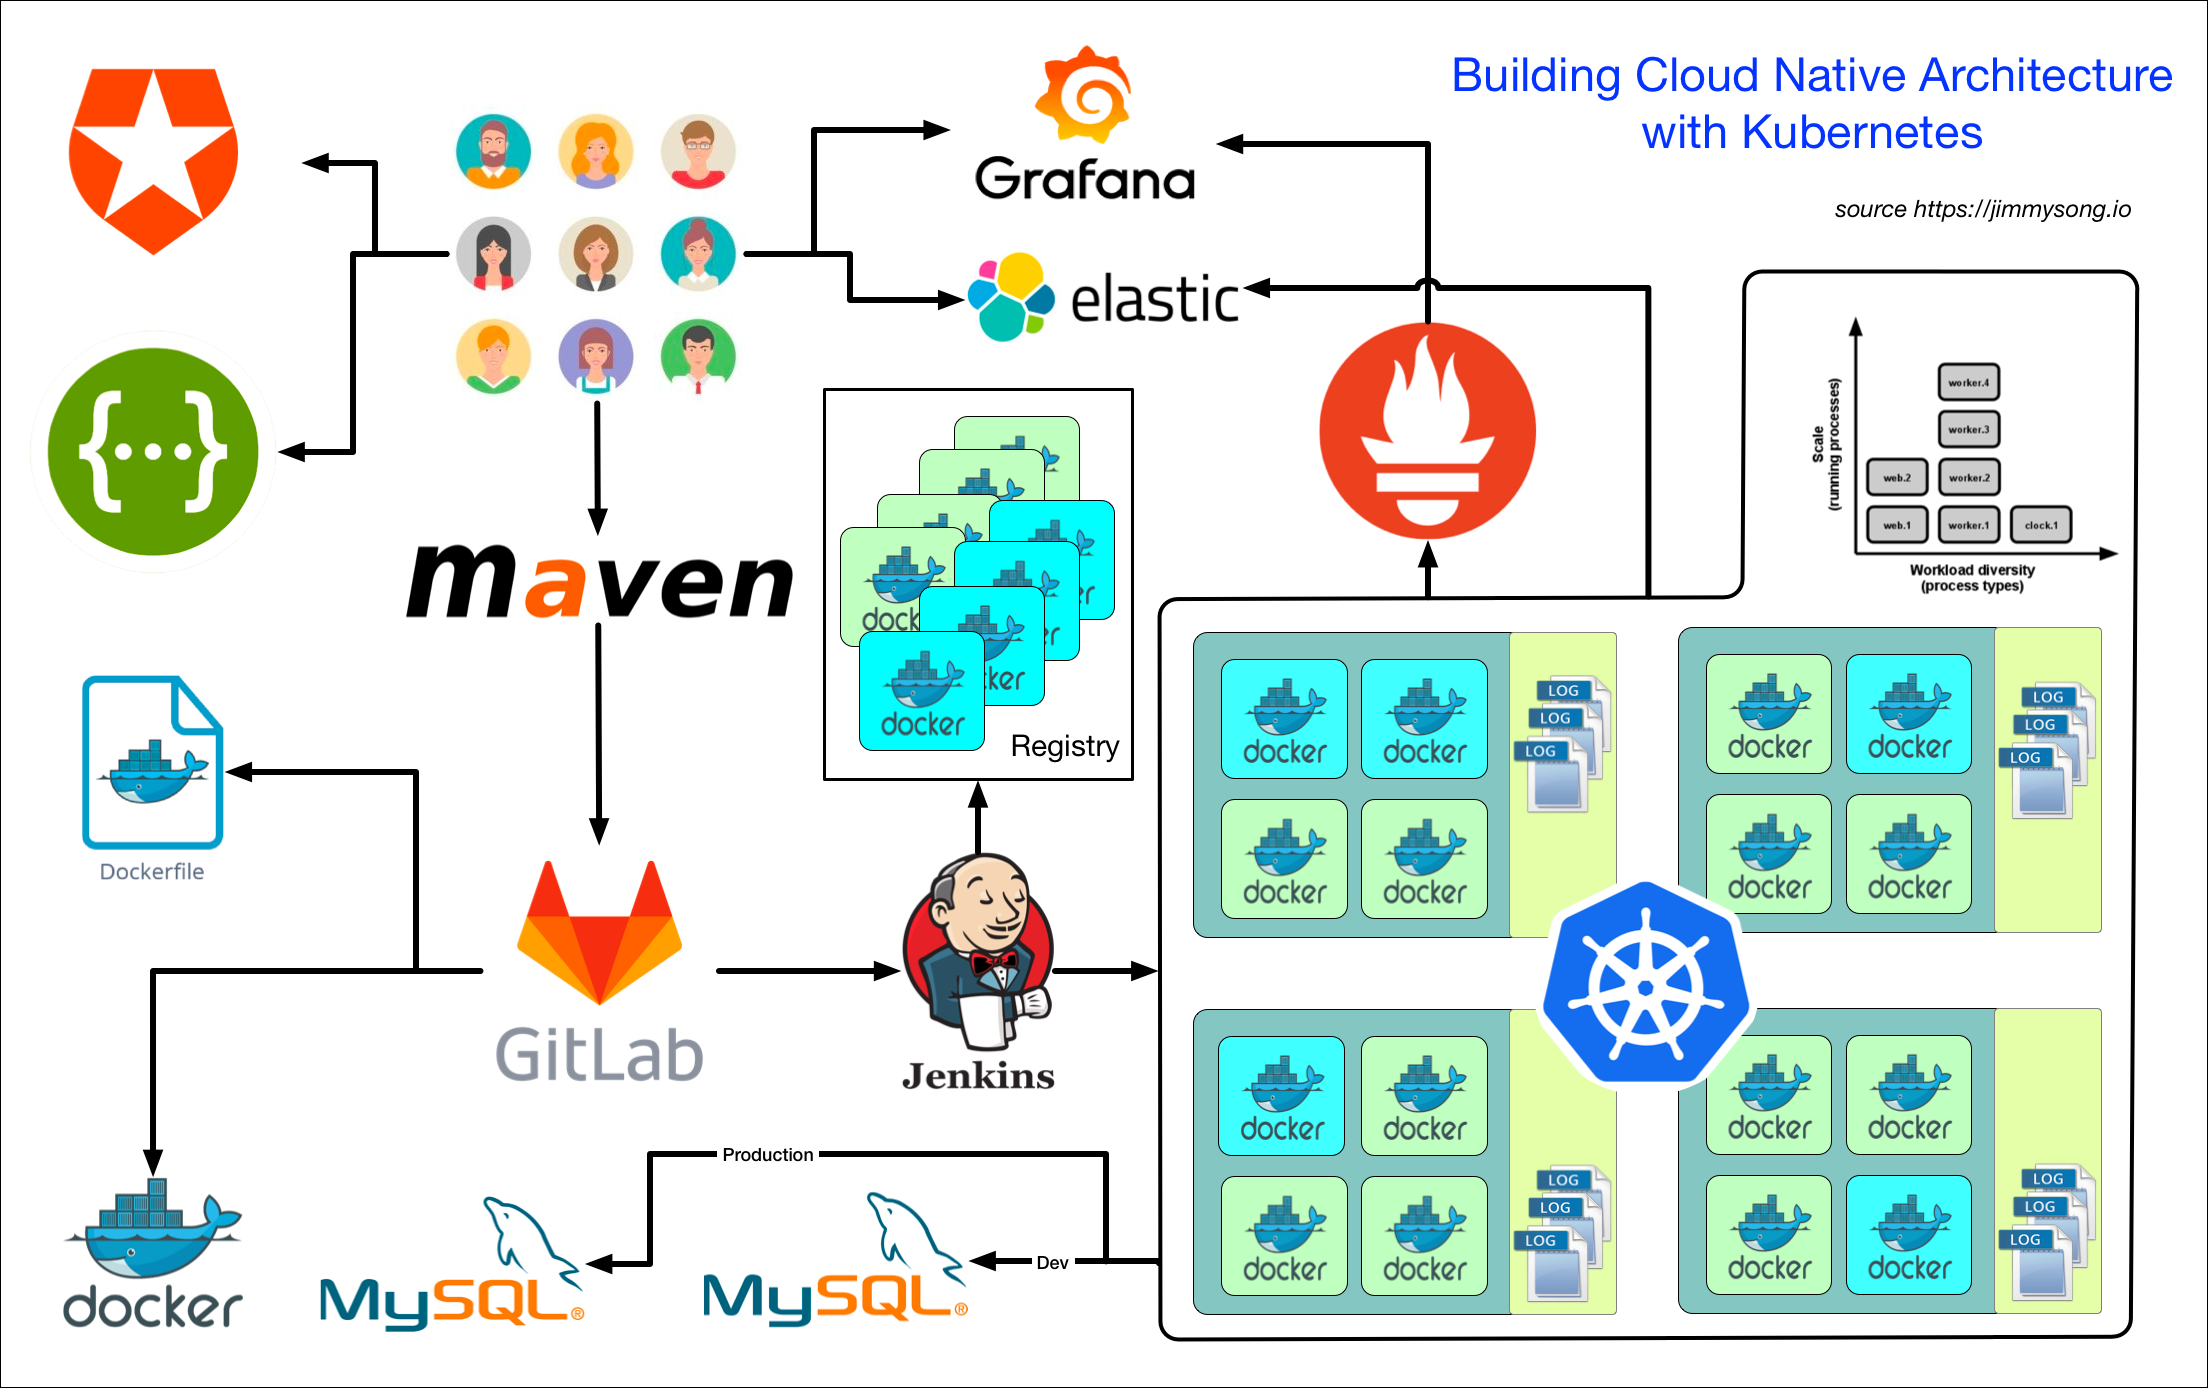 Building a Cloud Native Architecture with Kubernetes followed 12 factor app